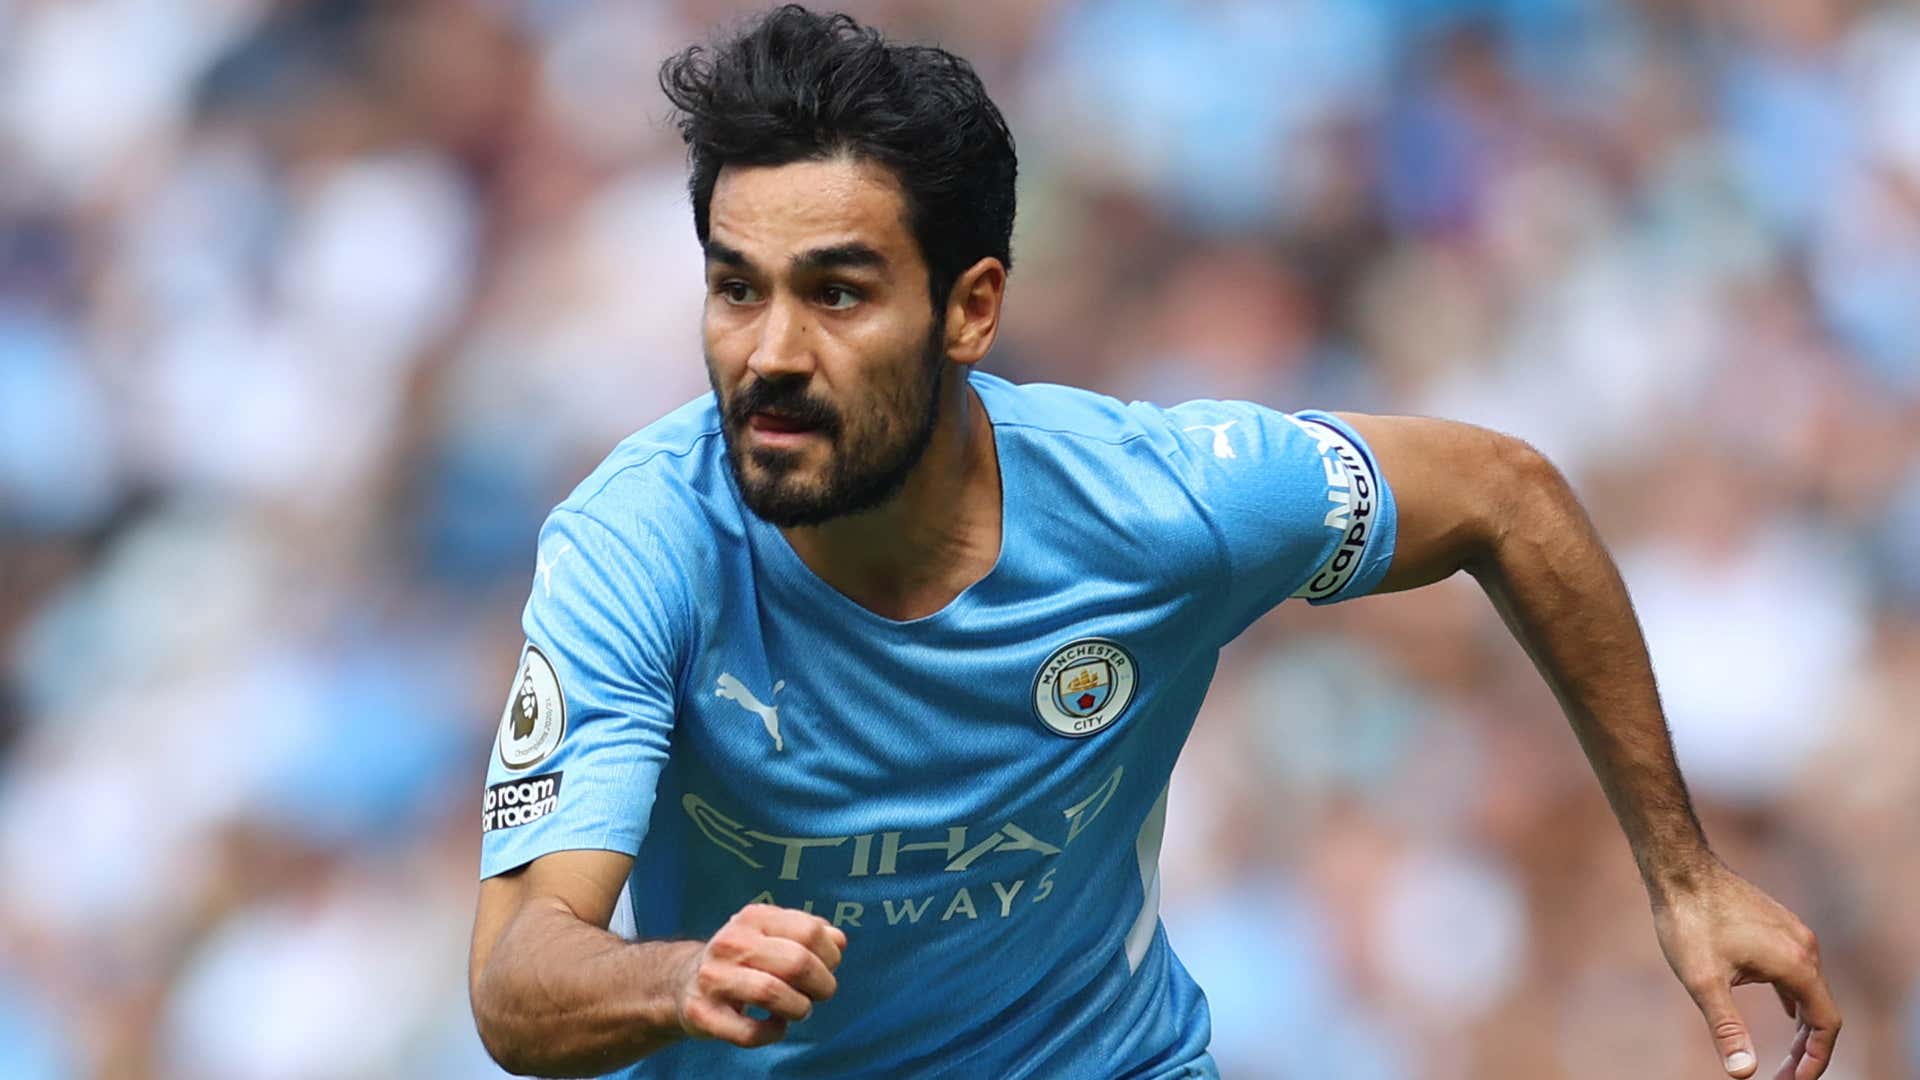 'It could have been 3-0 or 4-0' – Gundogan says Man Utd got off lightly and Man City found derby 'enjoyable'